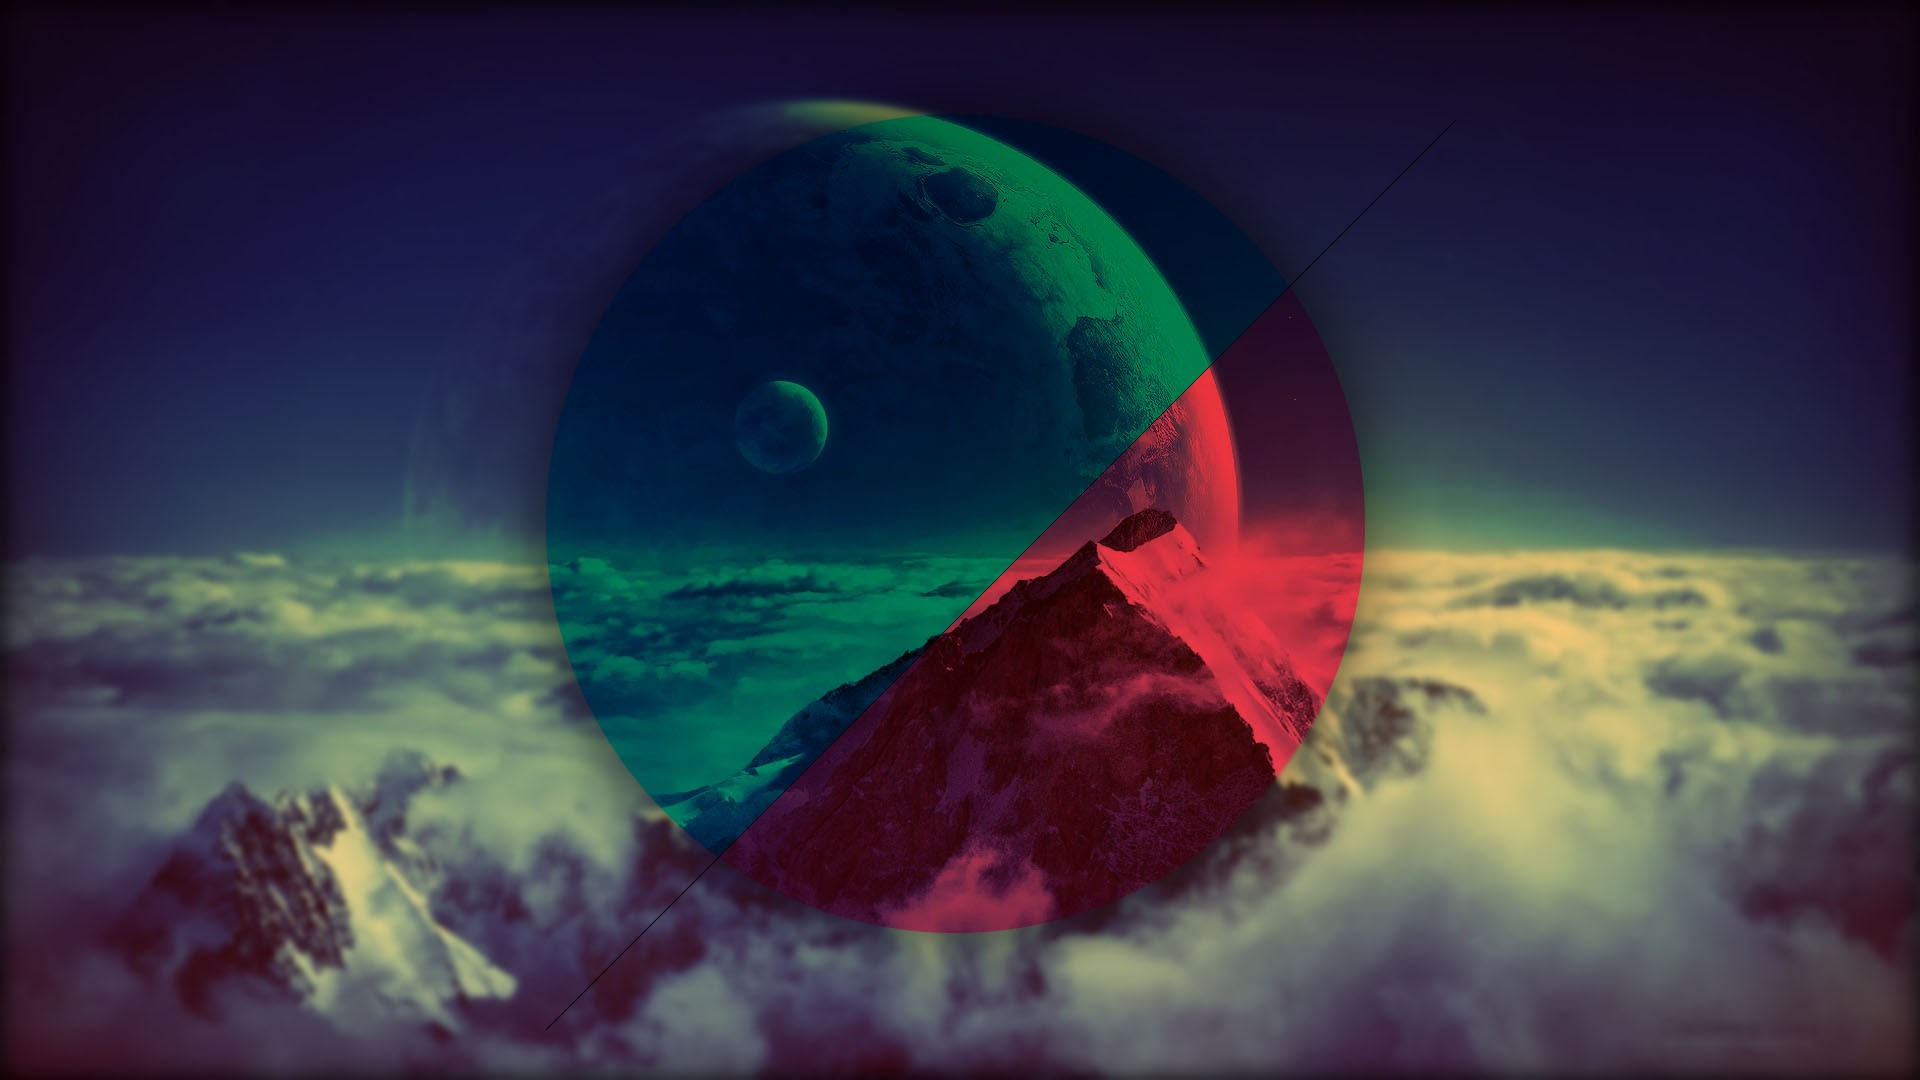 General 1920x1080 planet circle geometry colorful mountains space shapes polyscape vignette digital art snowy peak abstract